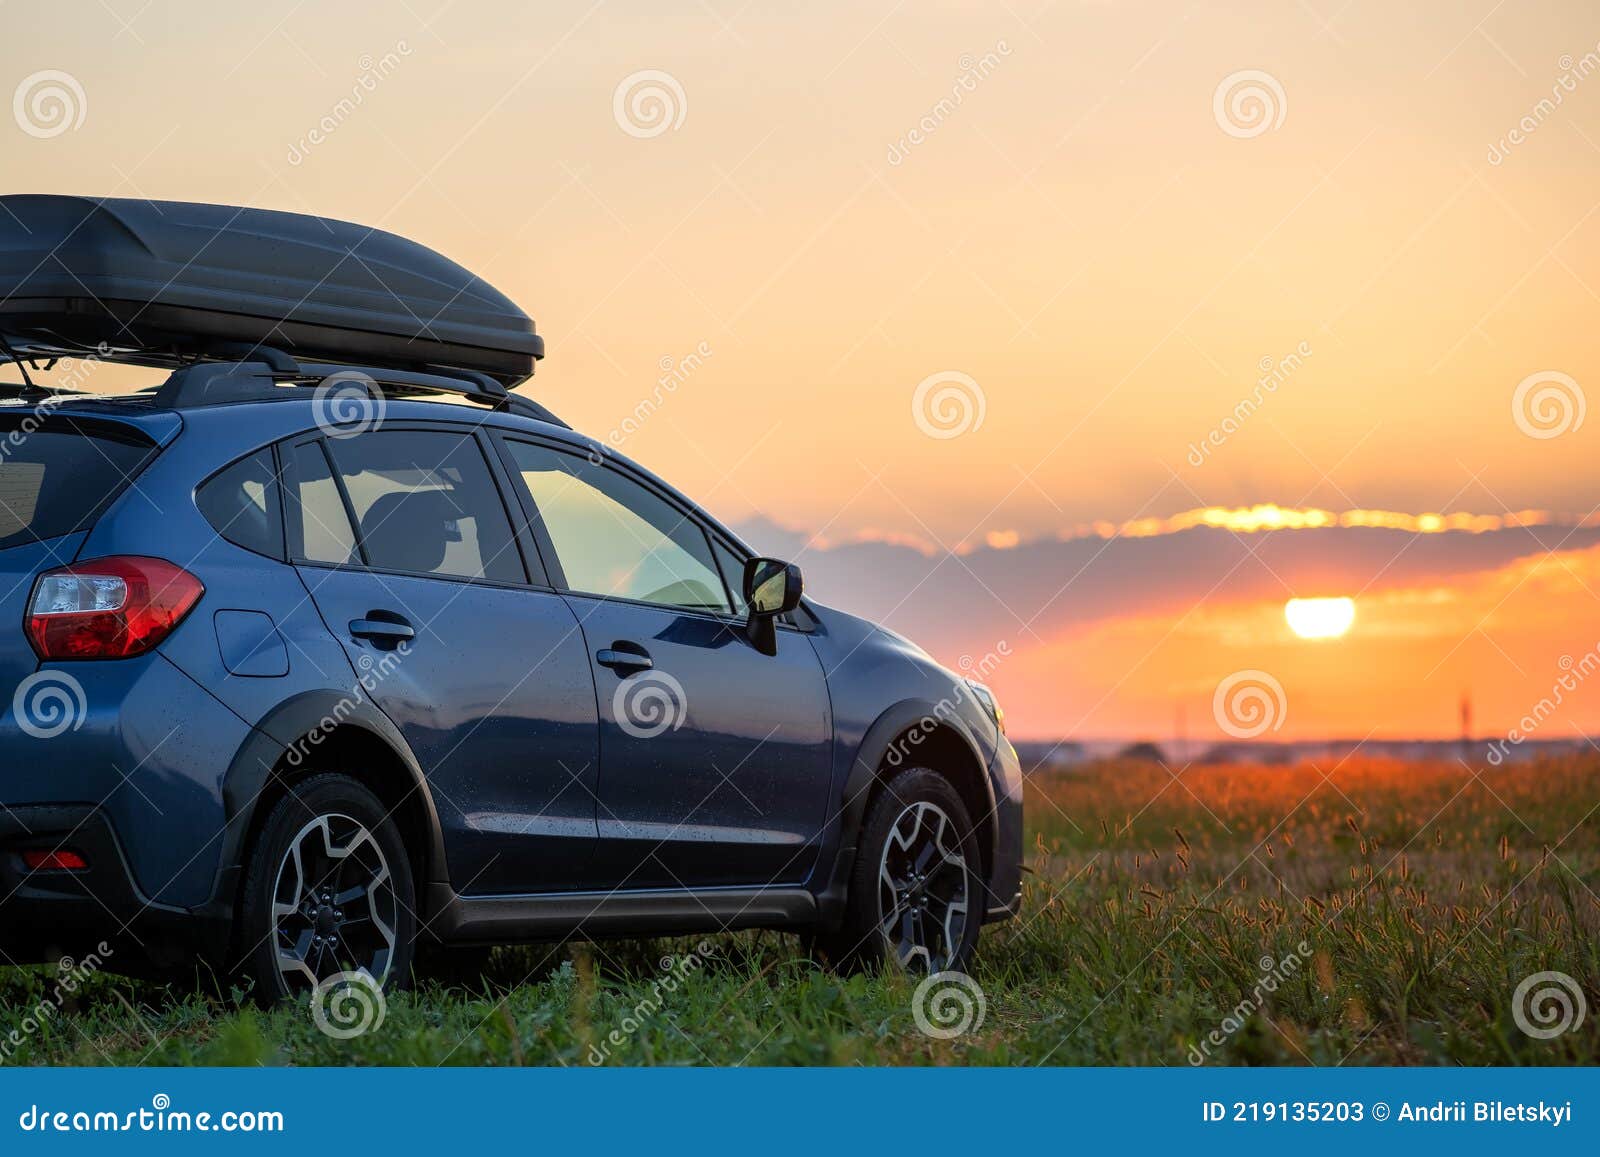 suv car with roof rack luggage container for off road travelling parked at roadside at sunset. road trip and getaway concept